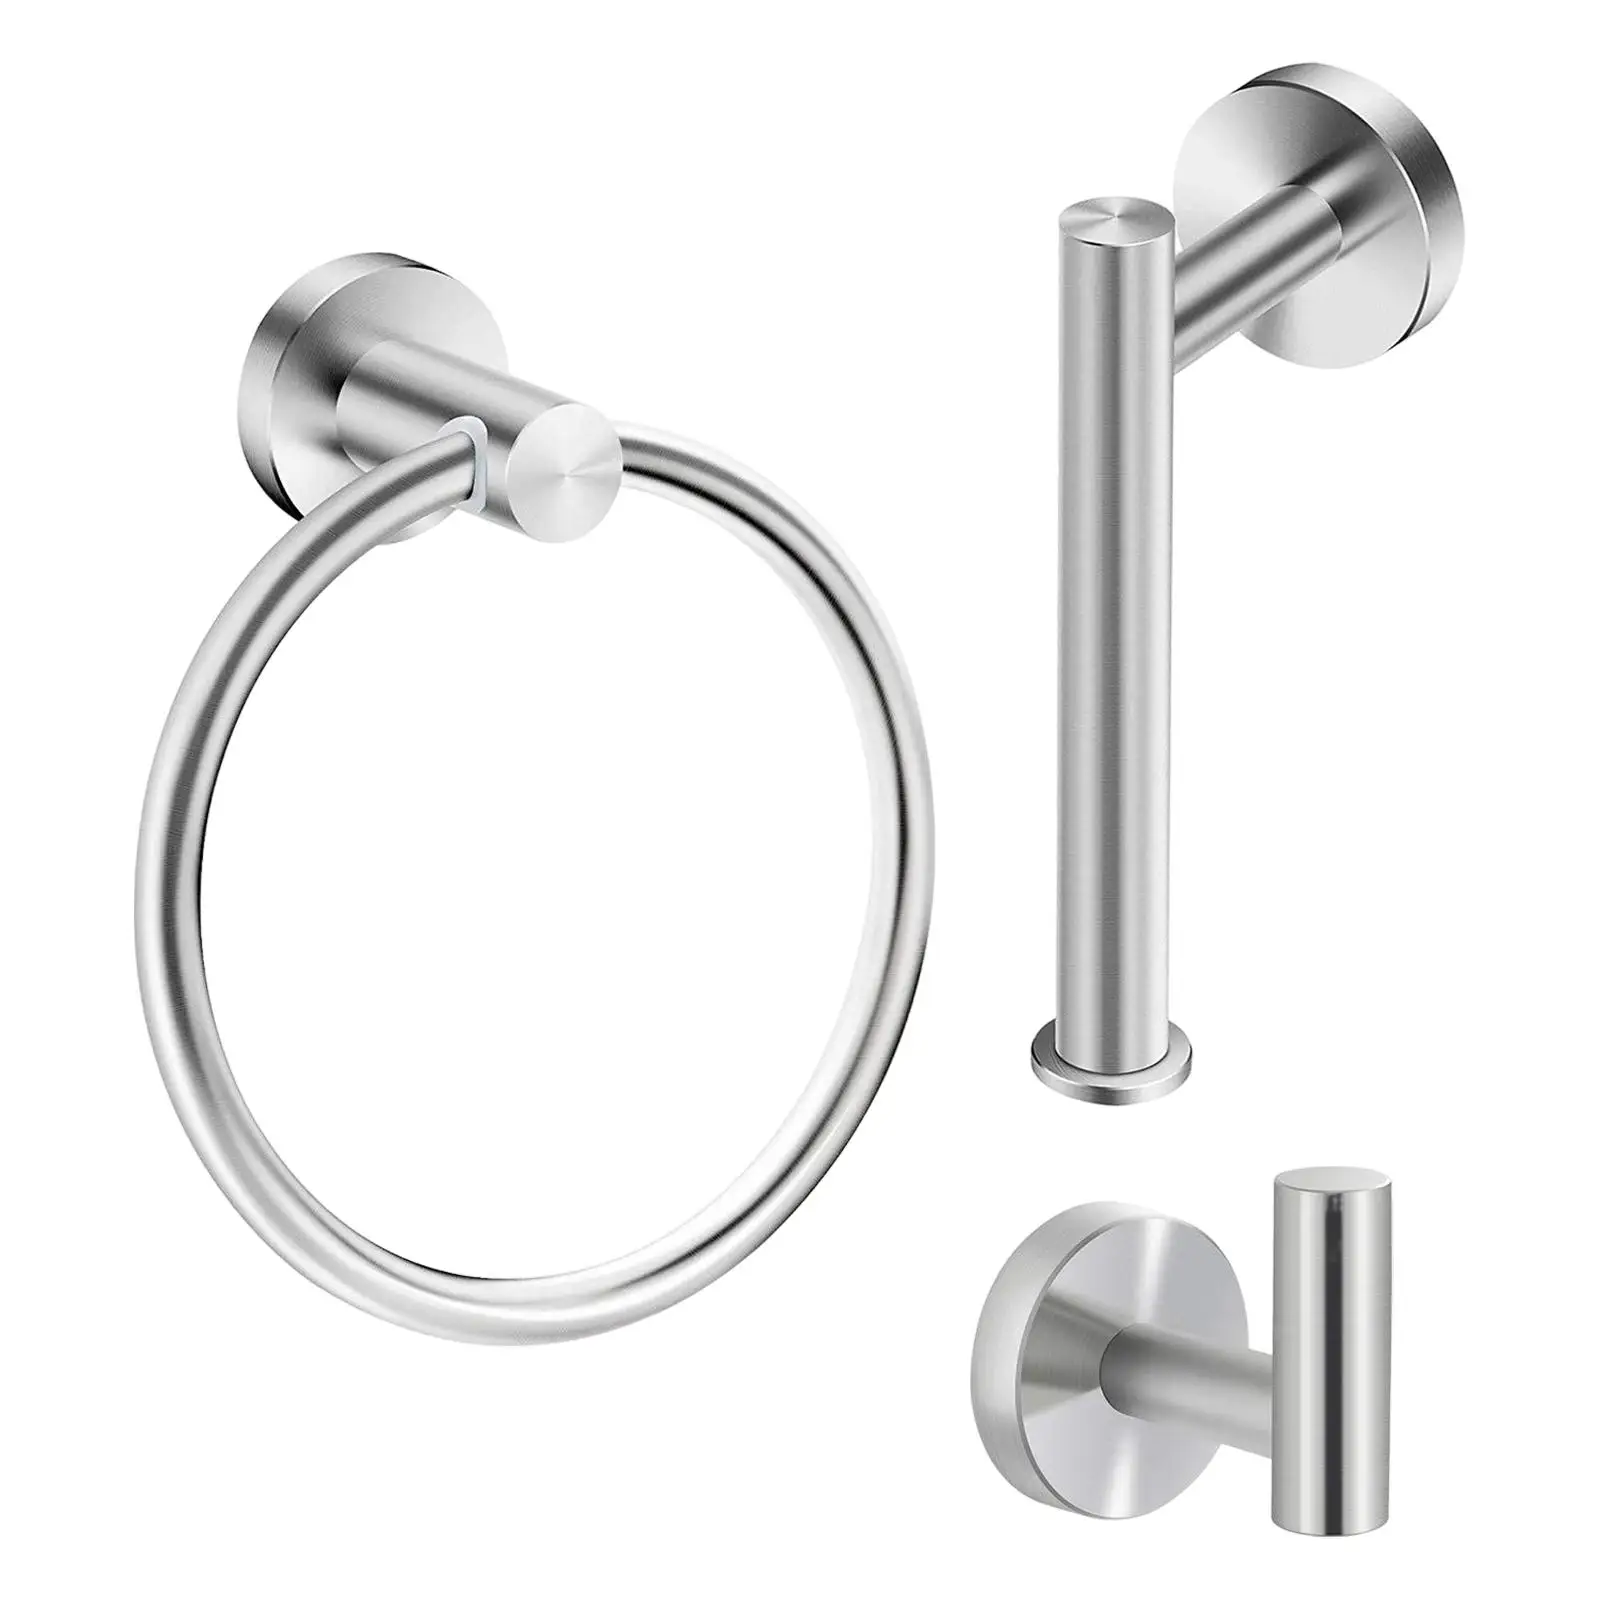 3 Pack Towel Bars with Paper Holder Multifunctional Stainless Steel with Towel Ring Bathroom Accessories for Room Dorm Farmhouse